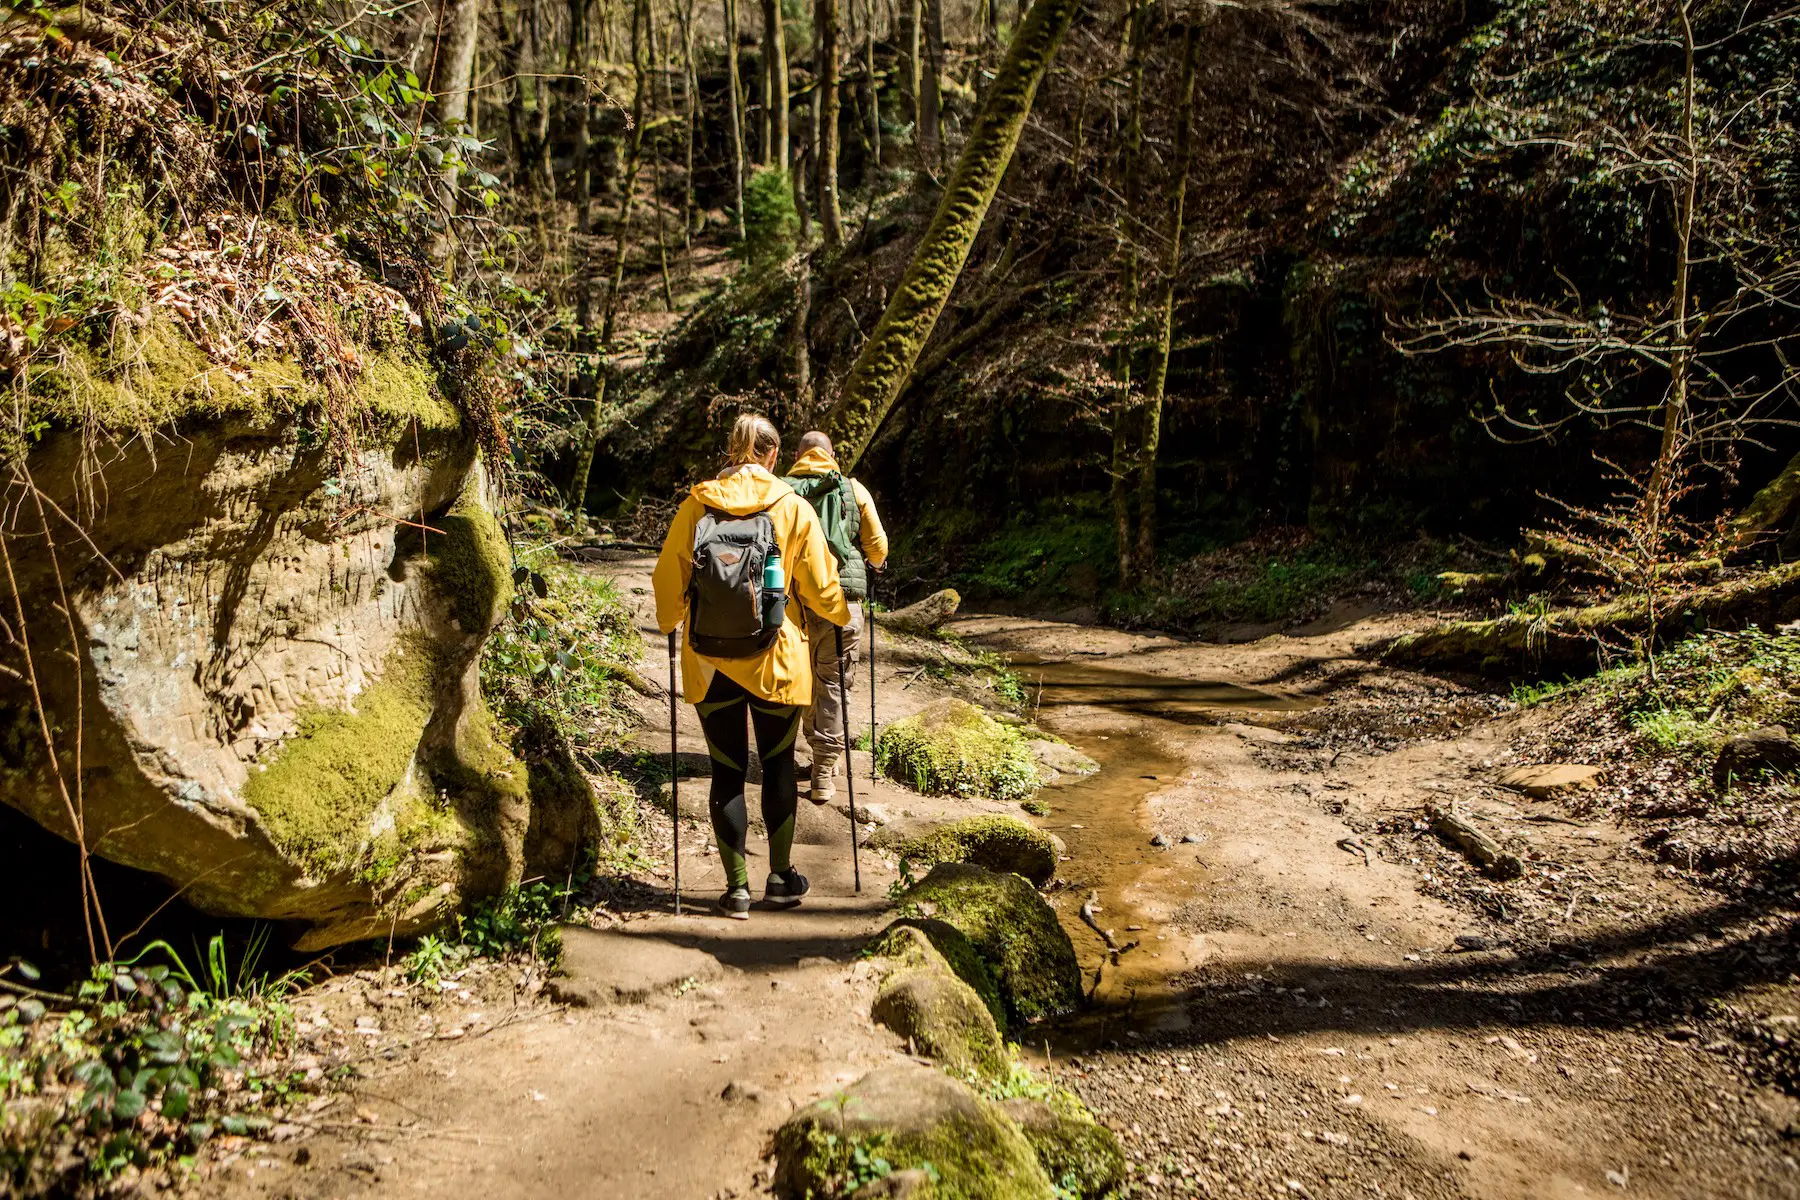 Two hikers walk through the forest in full hiking gear on a sunny day